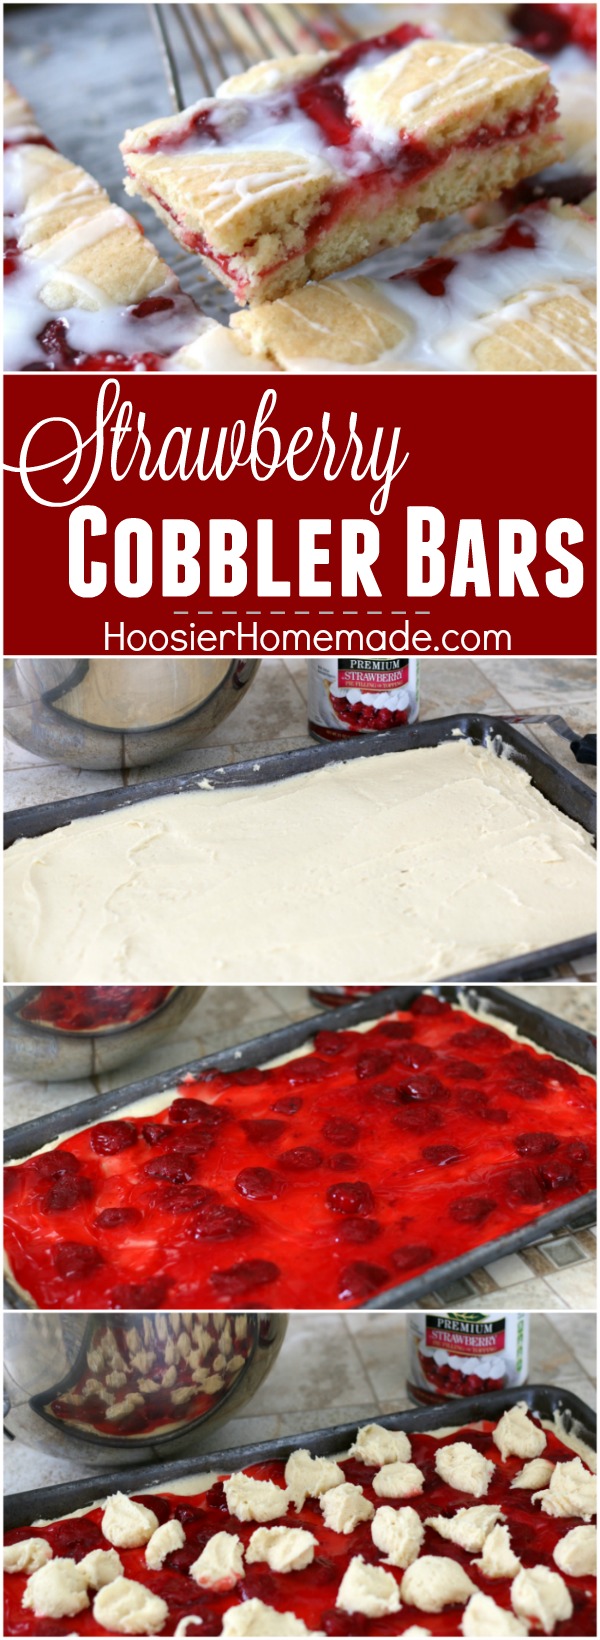 These Strawberry Cobbler Bars will knock your socks OFF! They are super simple to make and taste amazing! Serve them for any occasion, take them to a potluck or easy enough for a weeknight dessert!